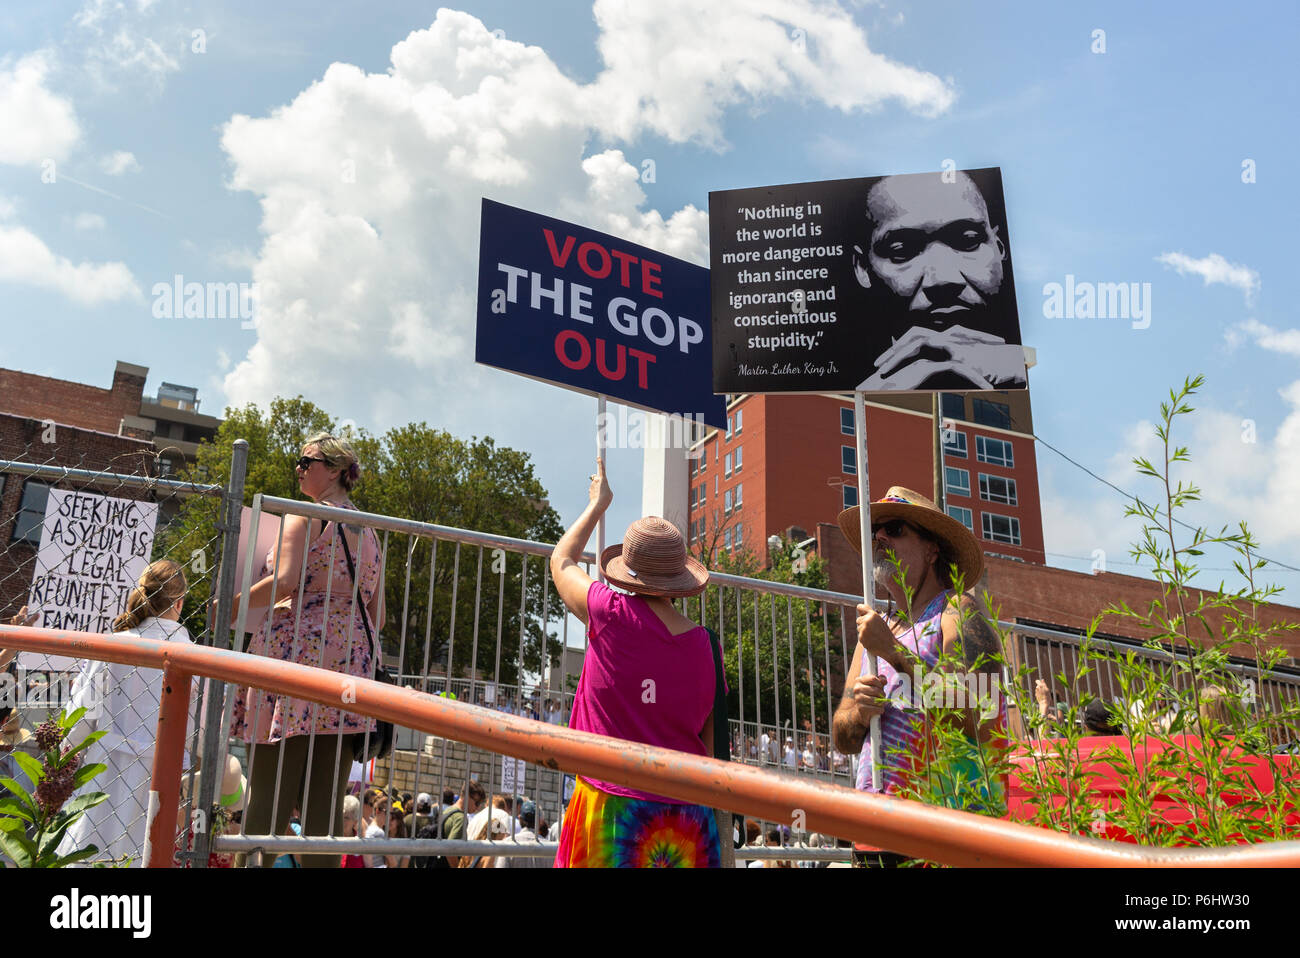 Protesters hold signs against the cloudy sky at the Families Belong Together rally in Asheville, NC, USA Stock Photo